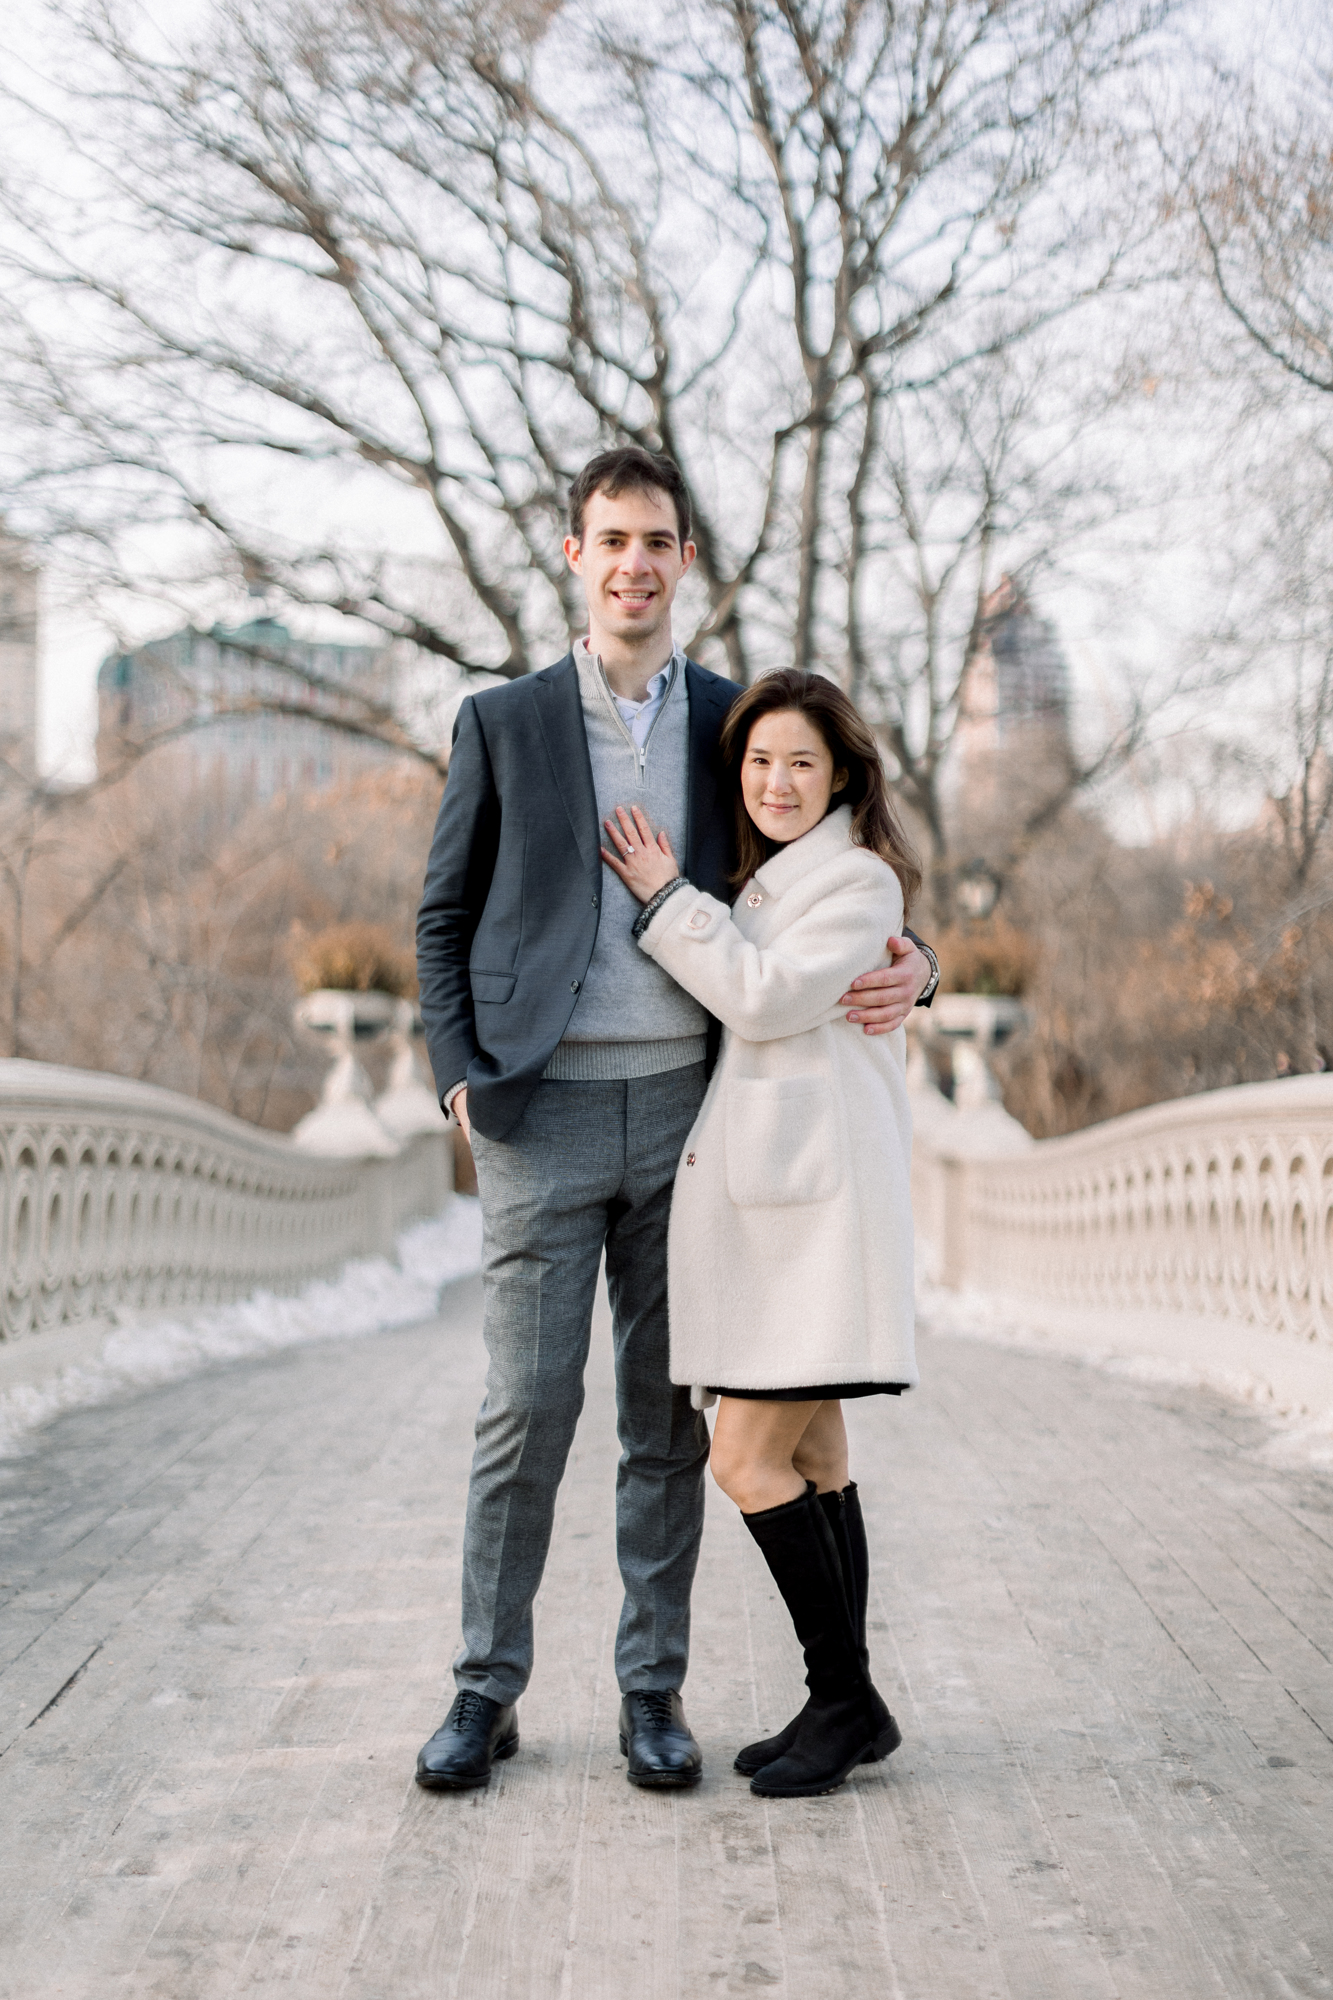 Manhattan's Engagement Photo Locations in Central Park